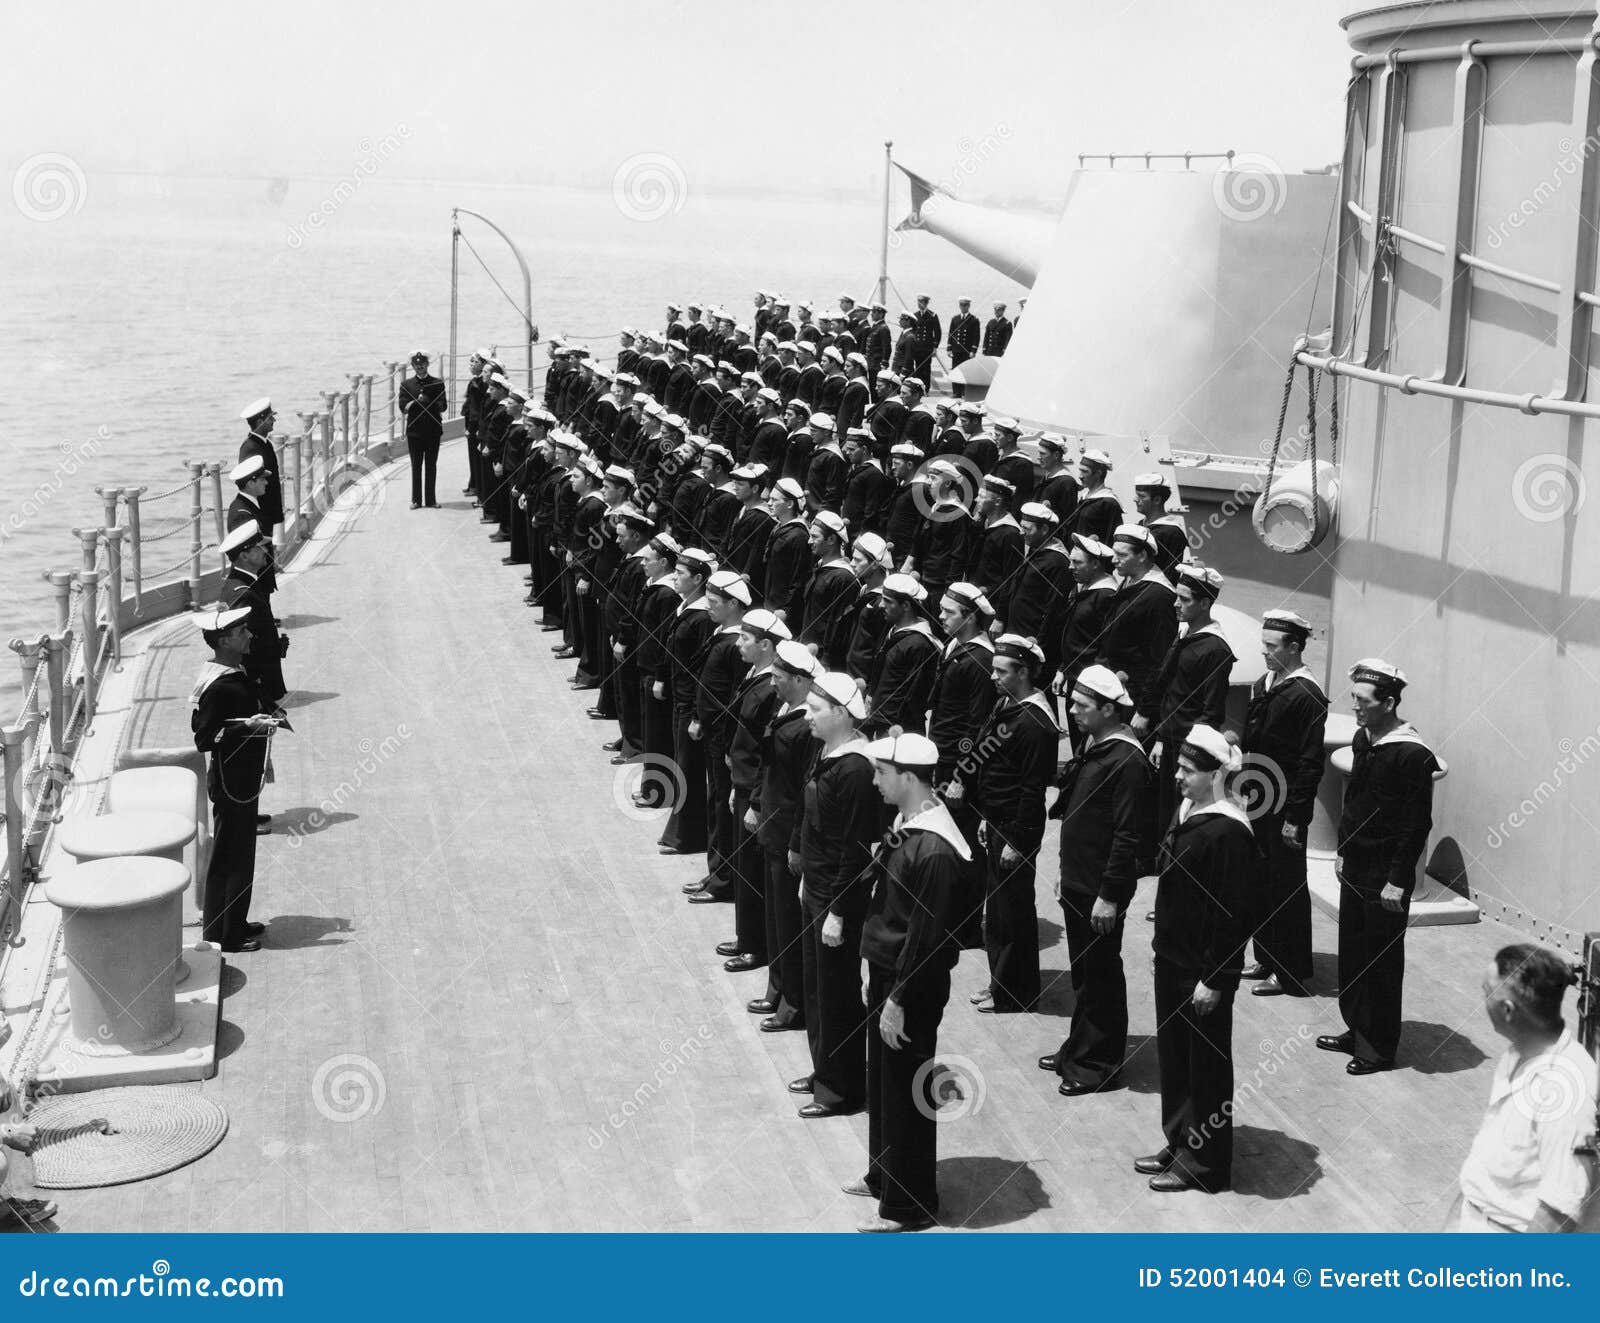 sailors at attention on naval ship